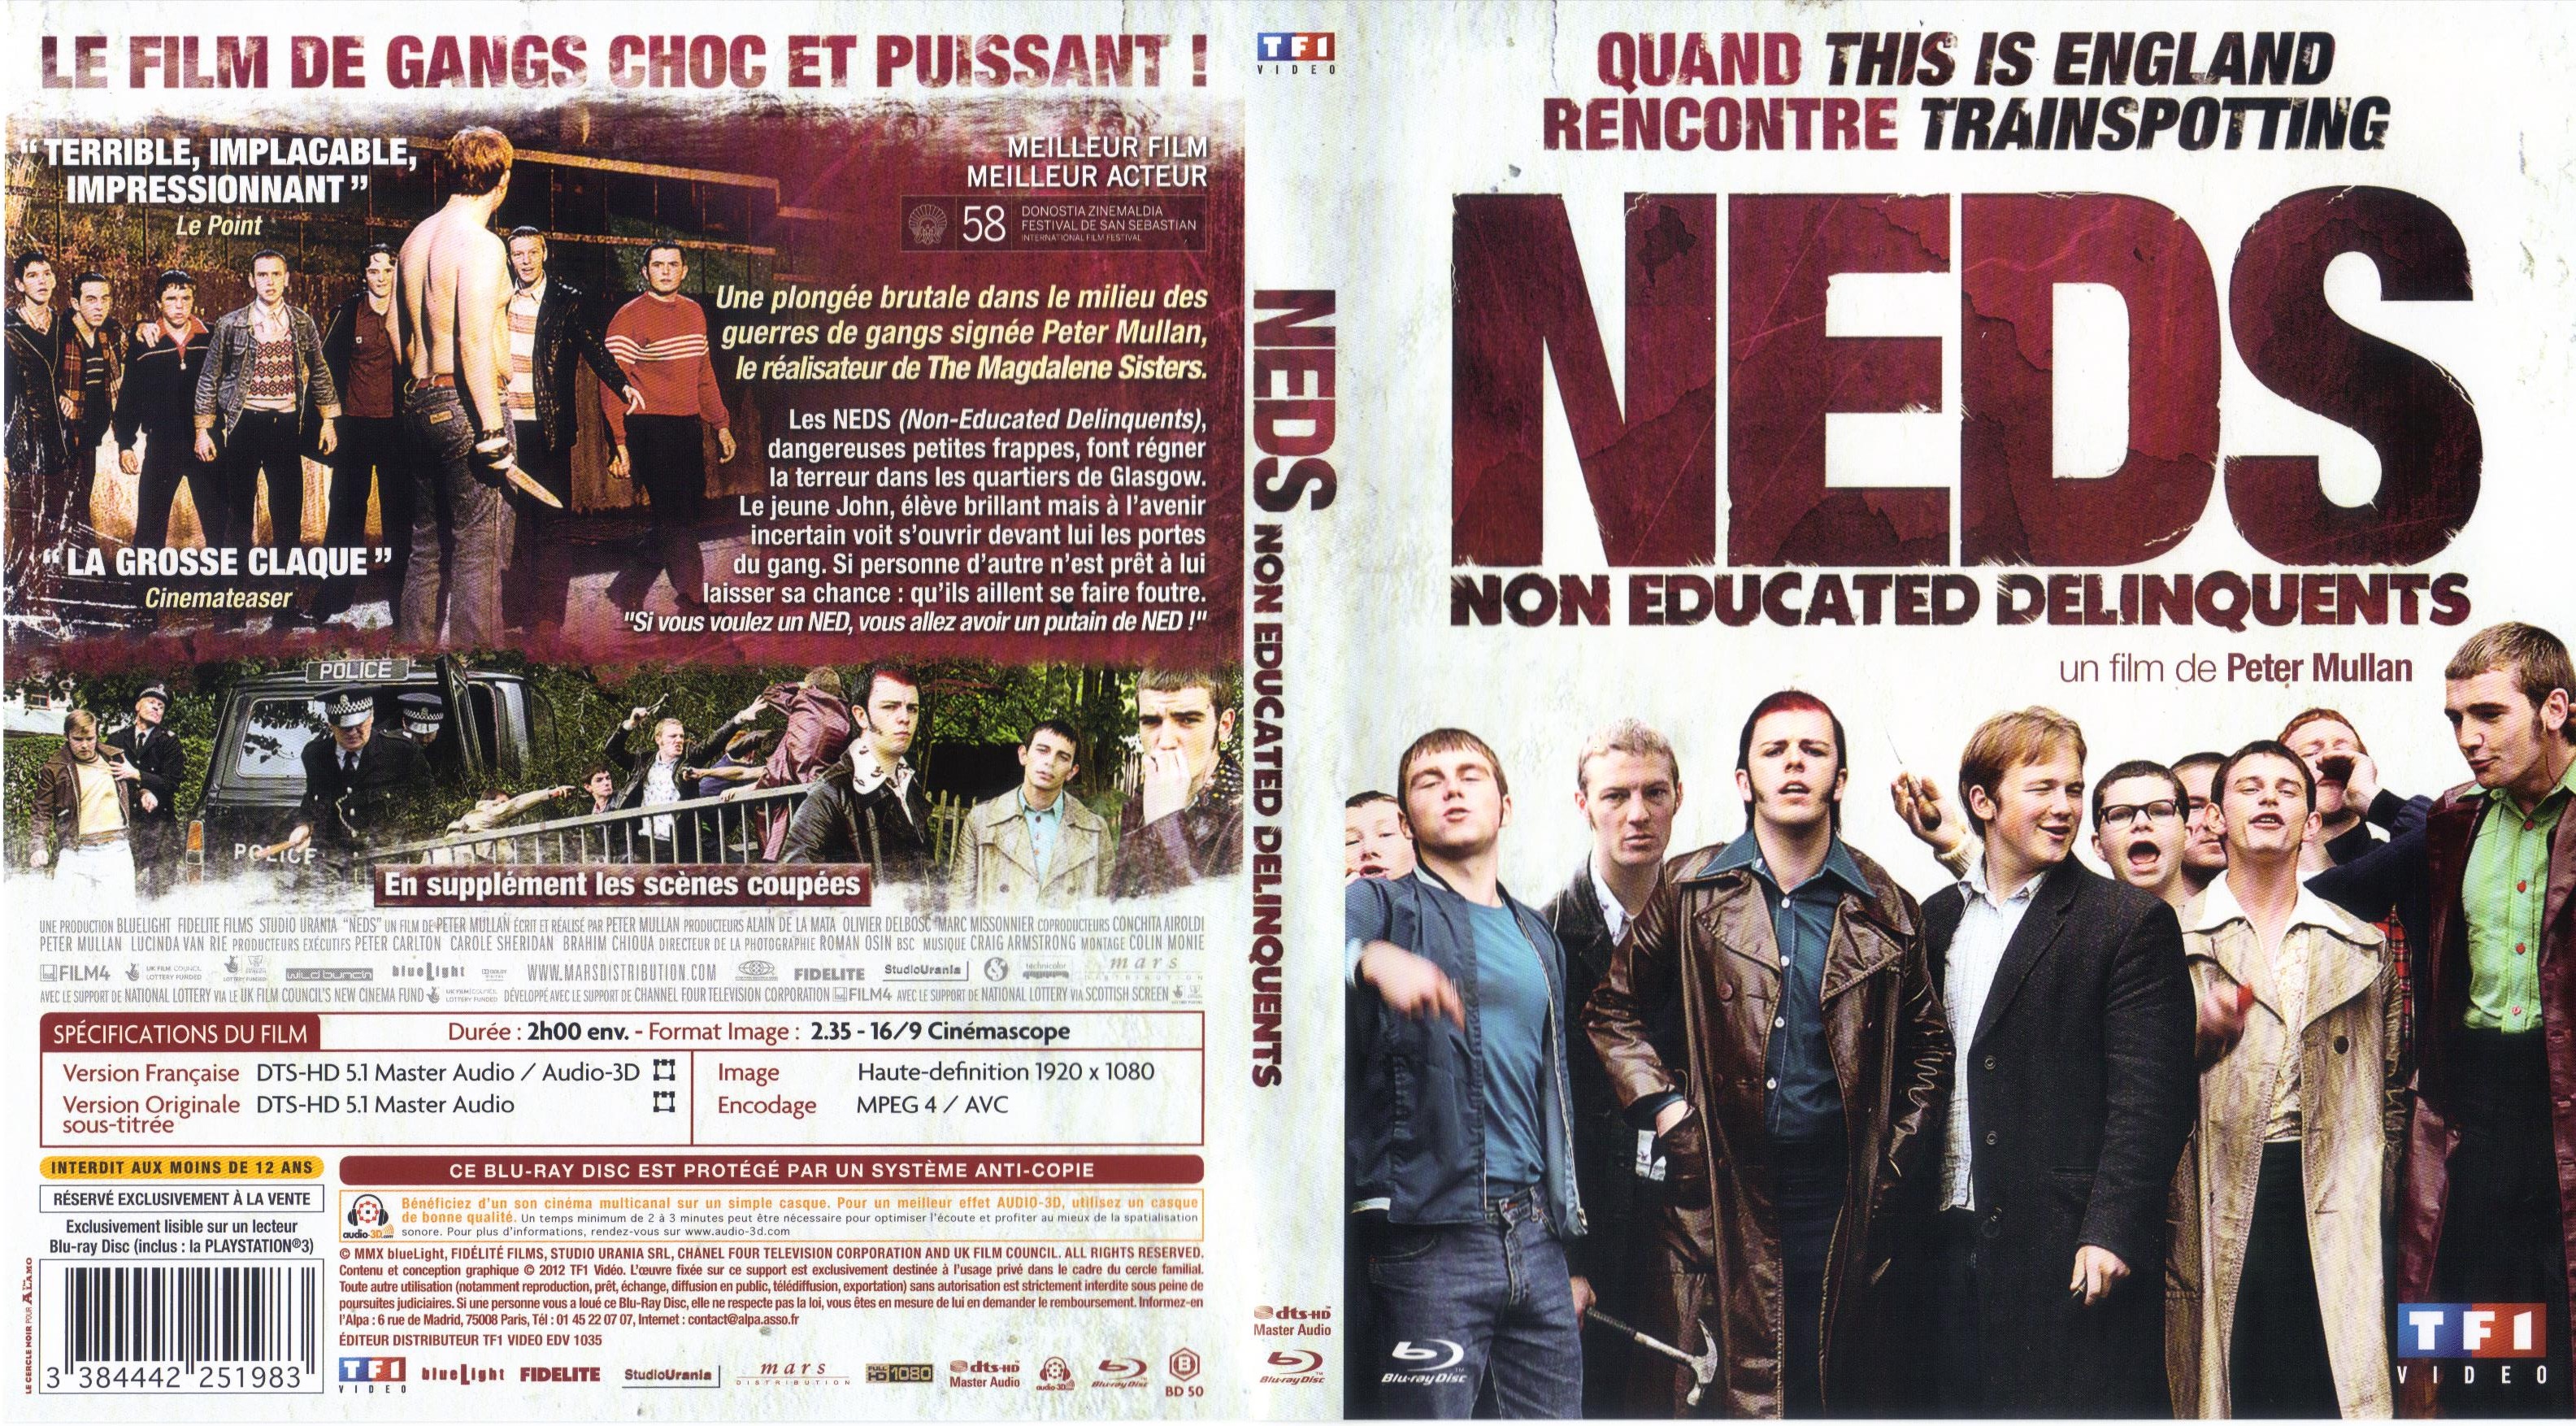 Jaquette DVD Neds (BLU-RAY)